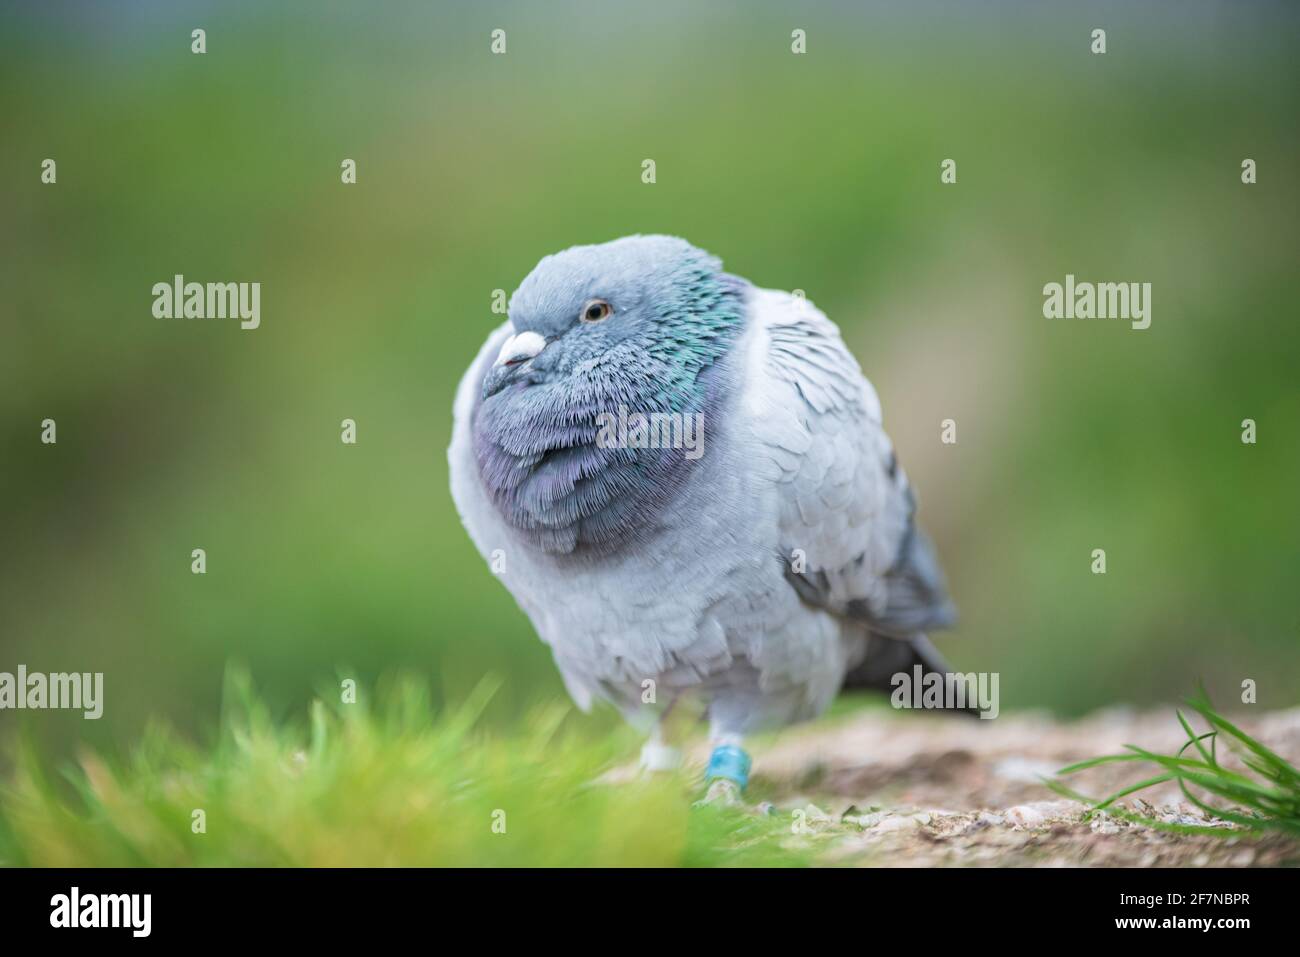 A ringed Wood Pigeon fluffed up with head sunken into body, spotted in Perry Barr, Birmingham, United Kingdom Stock Photo